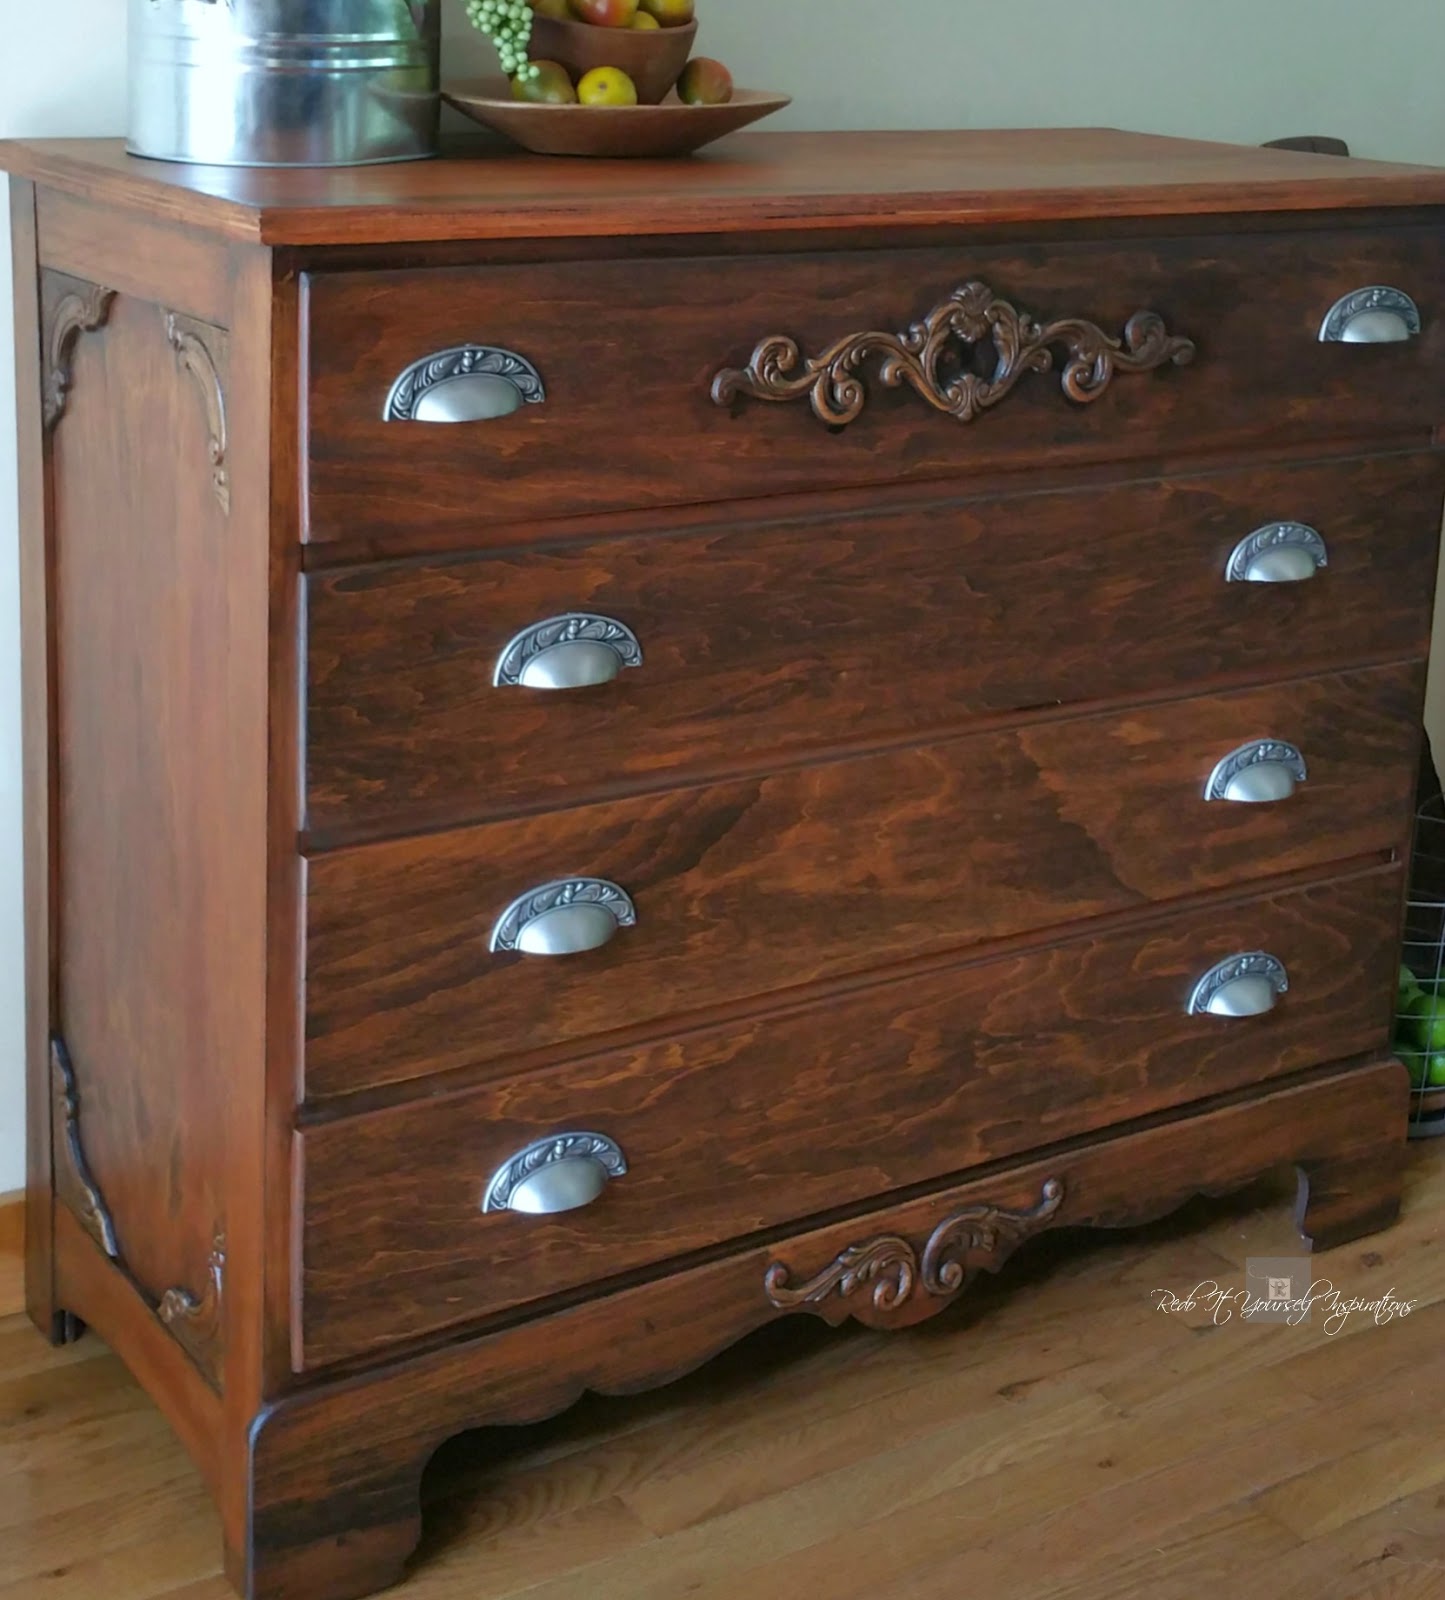 Plain to Classy Antique Chest of Drawers Redo | Redo It Yourself ...